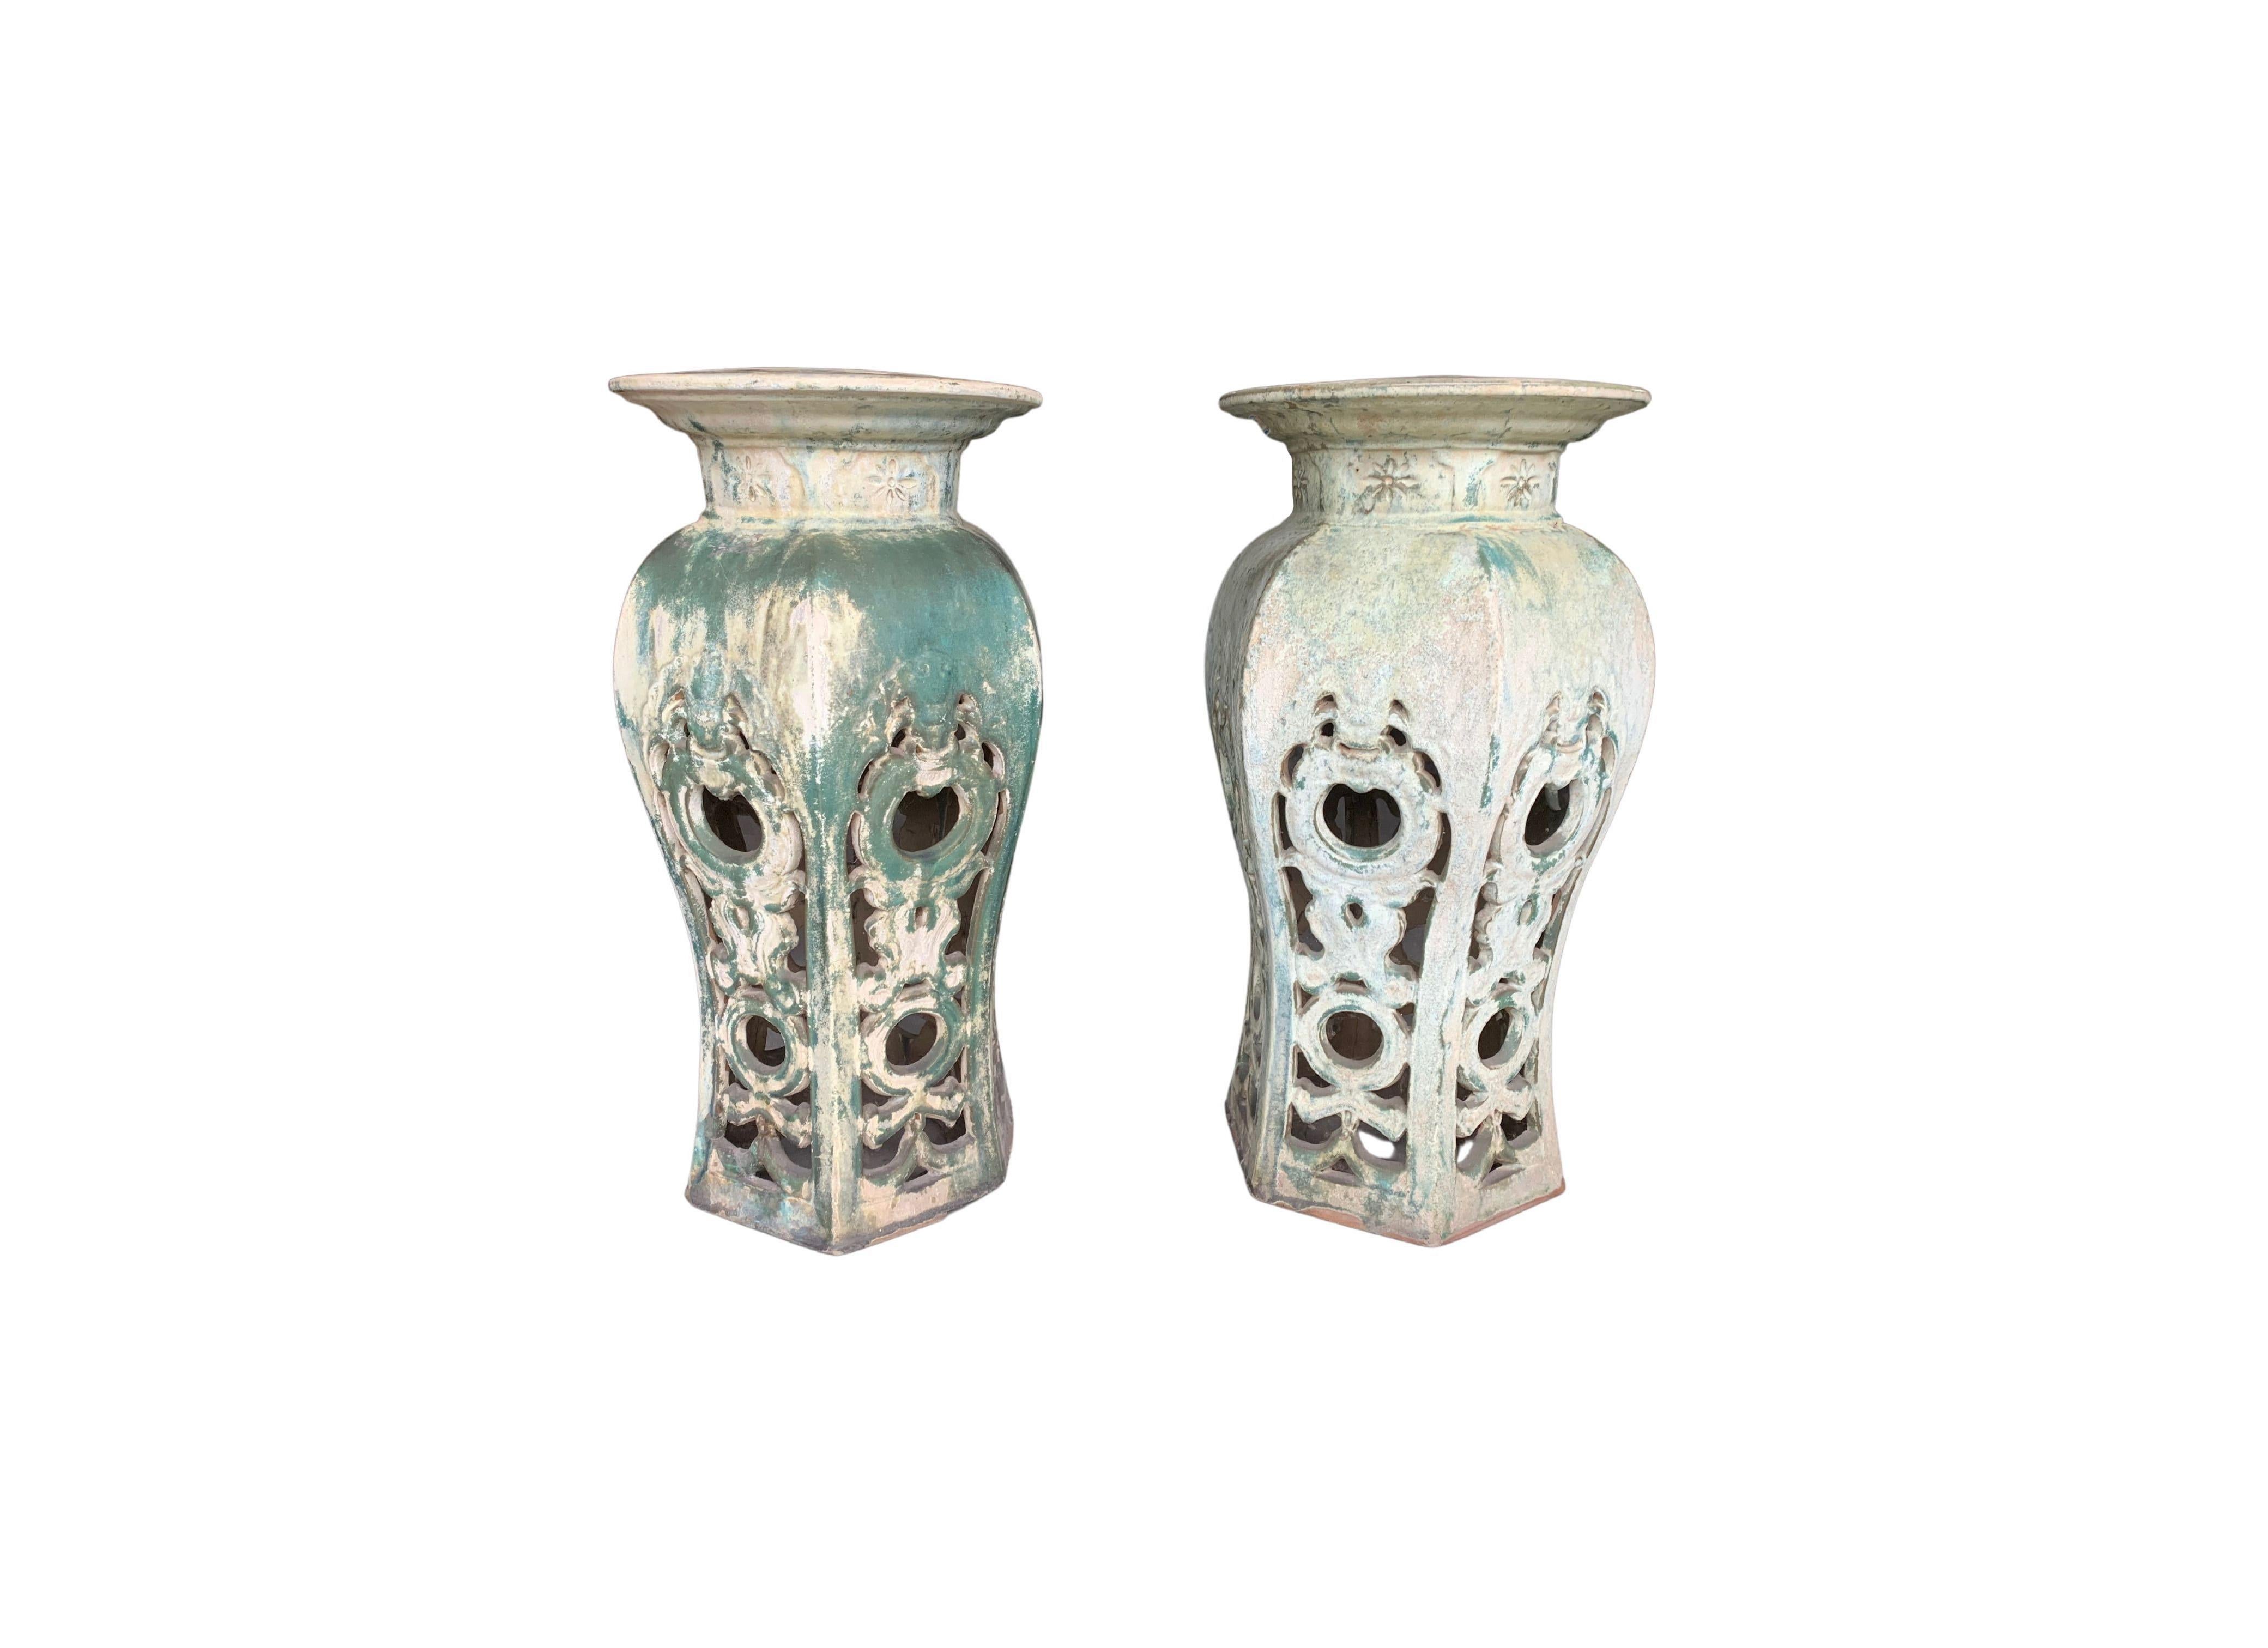 This pair of early 20th century Pedestals feature a wonderful age-related faded green finish. They feature a hexagonal base and largely hollow centre allowing them to remain relatively light yet robust. A perfect item to display special urns,